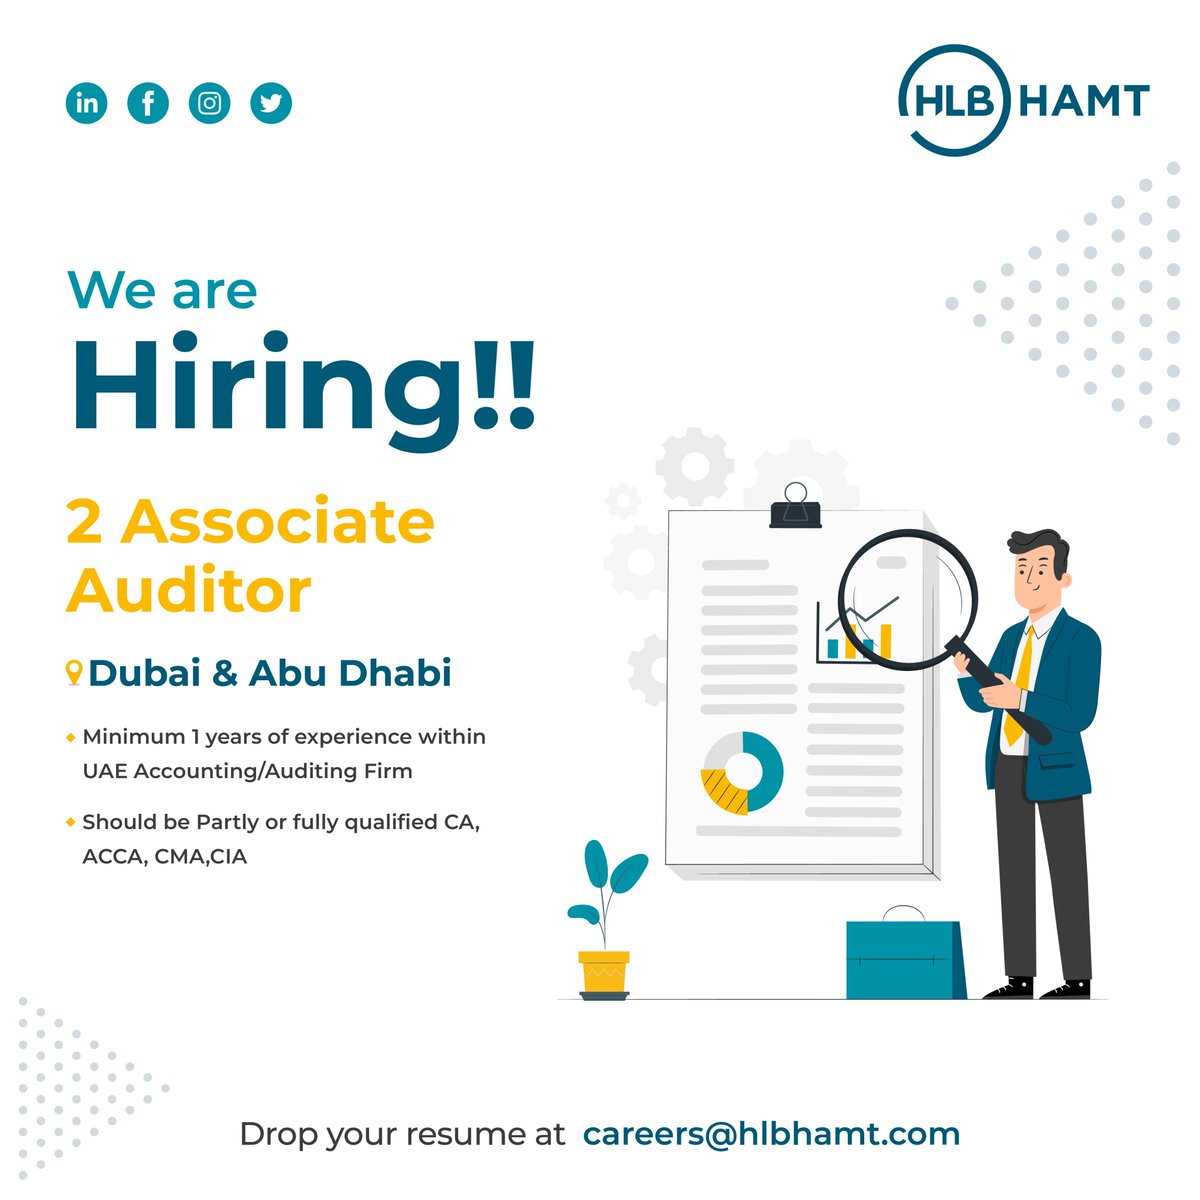 We're seeking a driven Audit professionals to join our growing team!

Eligible candidates can share their resumes to careers@hlbhamt.com.

#jobs #jobopportunities #jobhiring #auditor #audit #auditjobs #careersuae #careers #hiring #associate #HLBHAMT